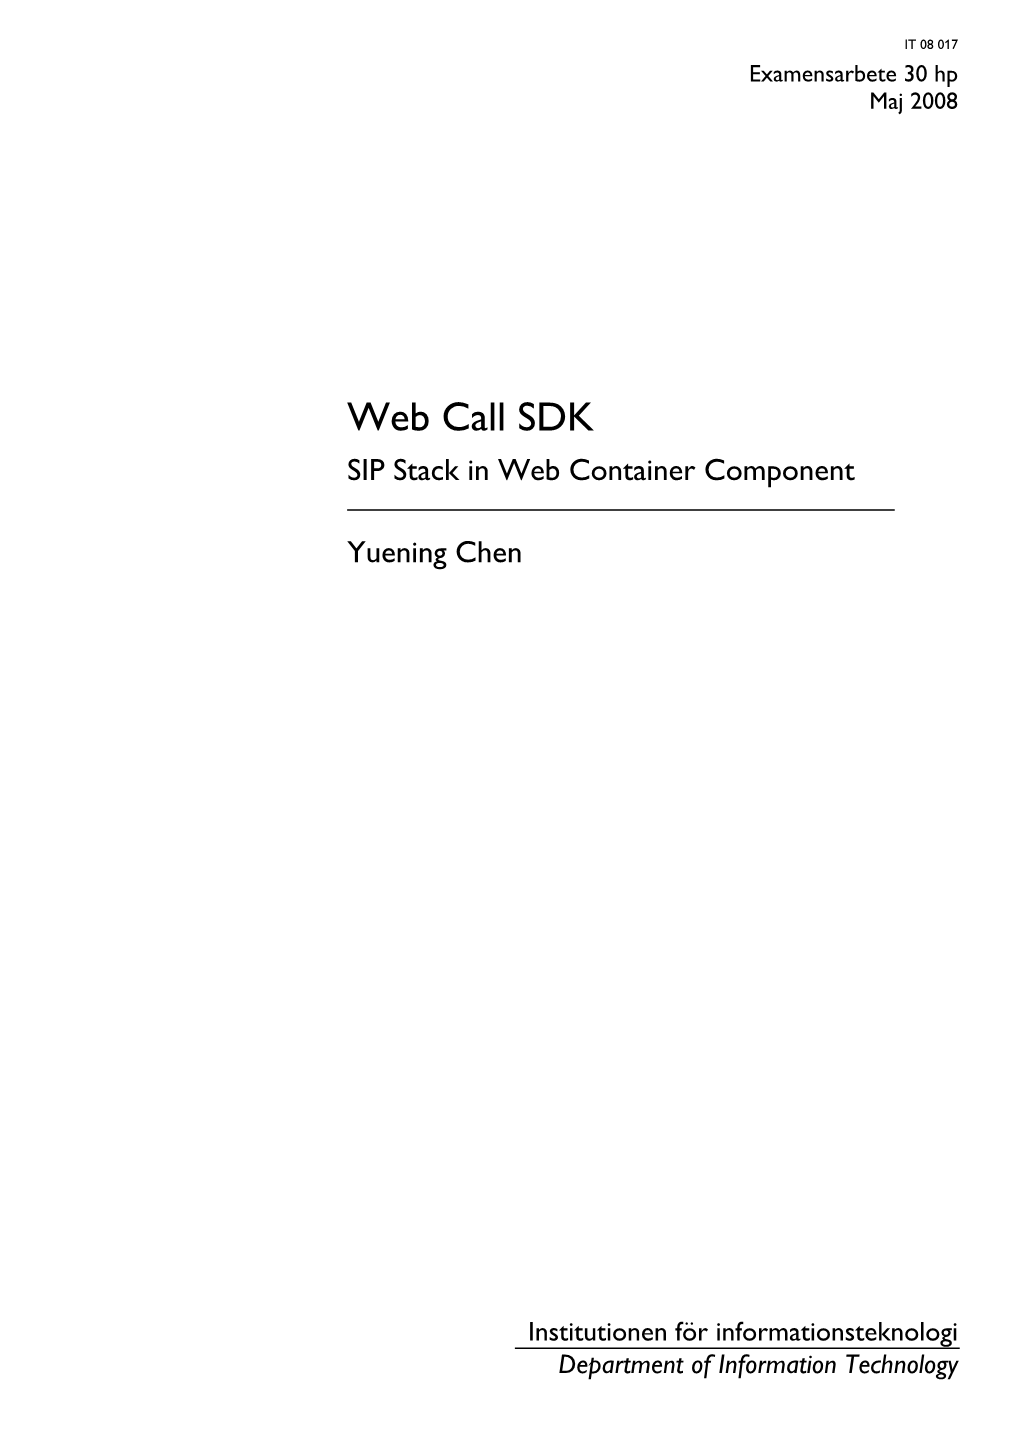 Web Call SDK SIP Stack in Web Container Component